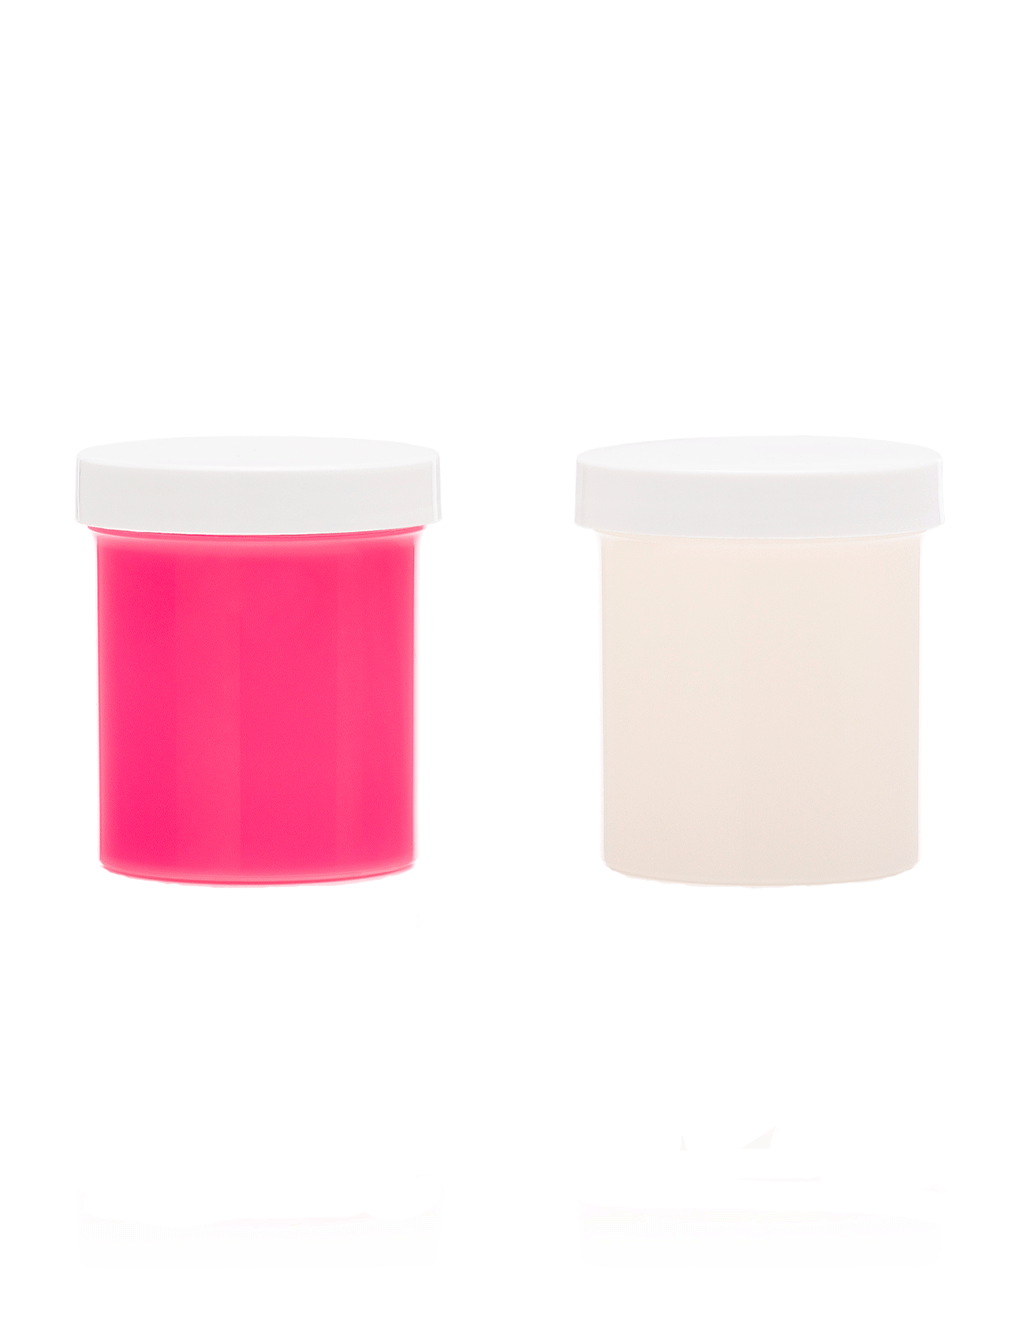 Clone-A-Willy Refill Kit - Hot Pink - Contents